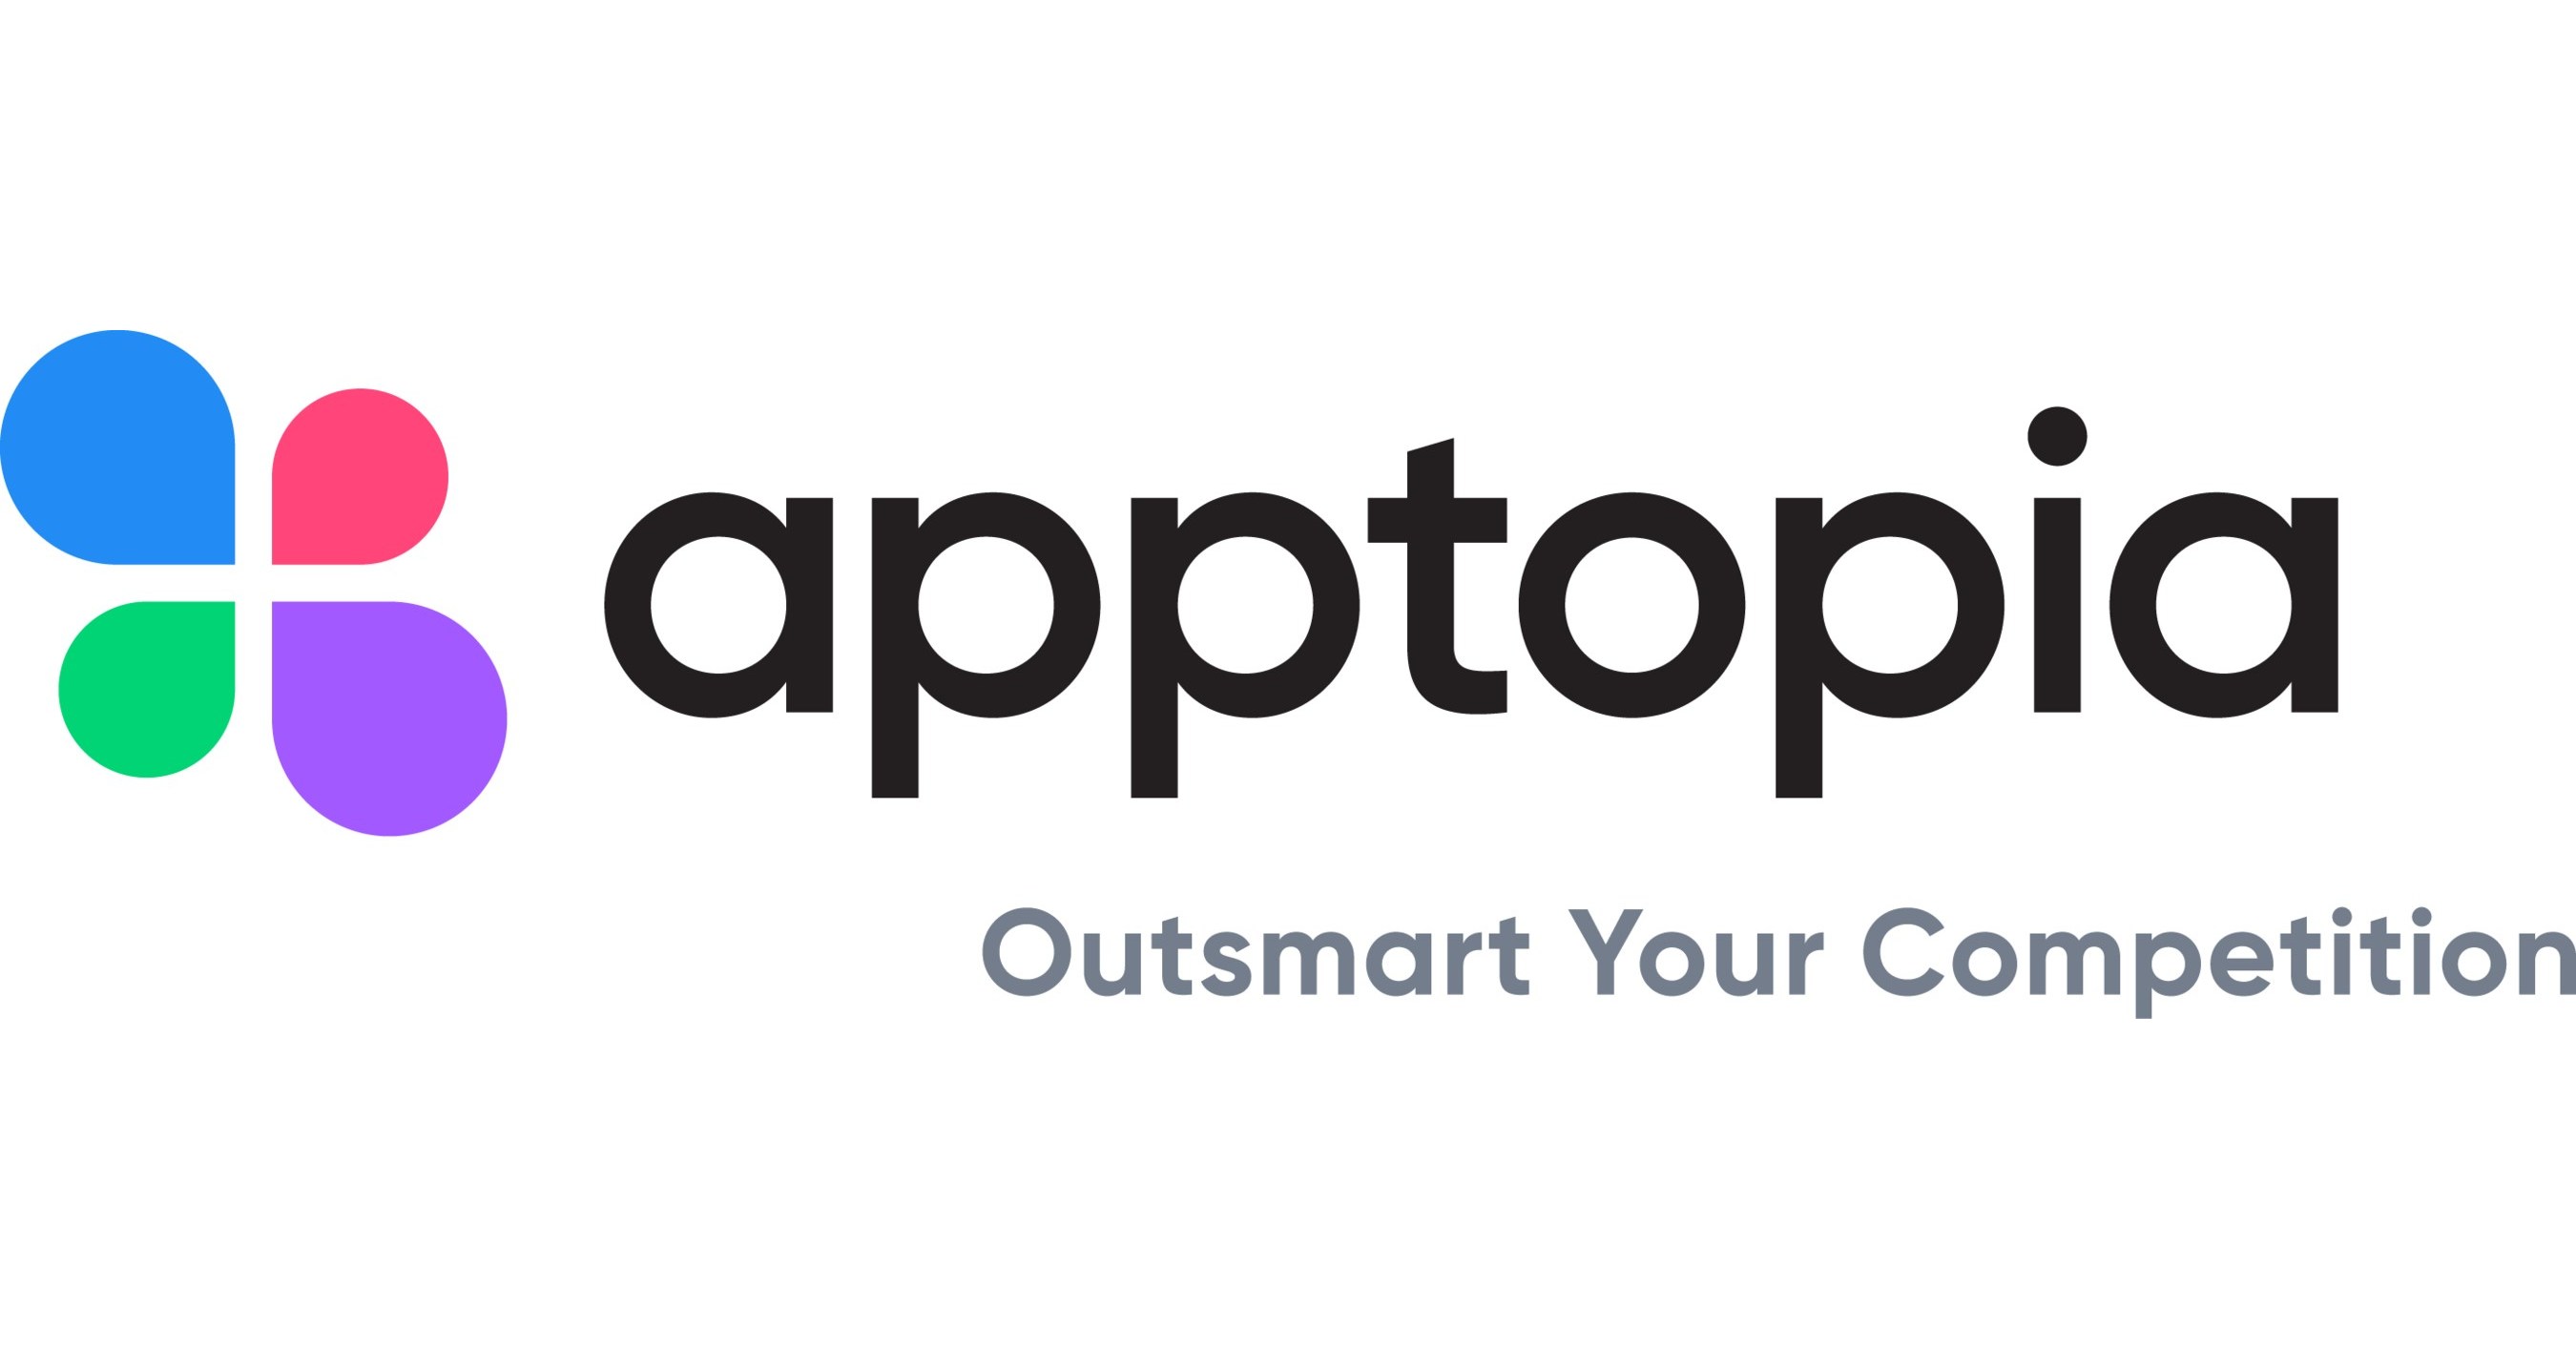 Apptopia appoints Steve Swad as President & Chief Operating Officer